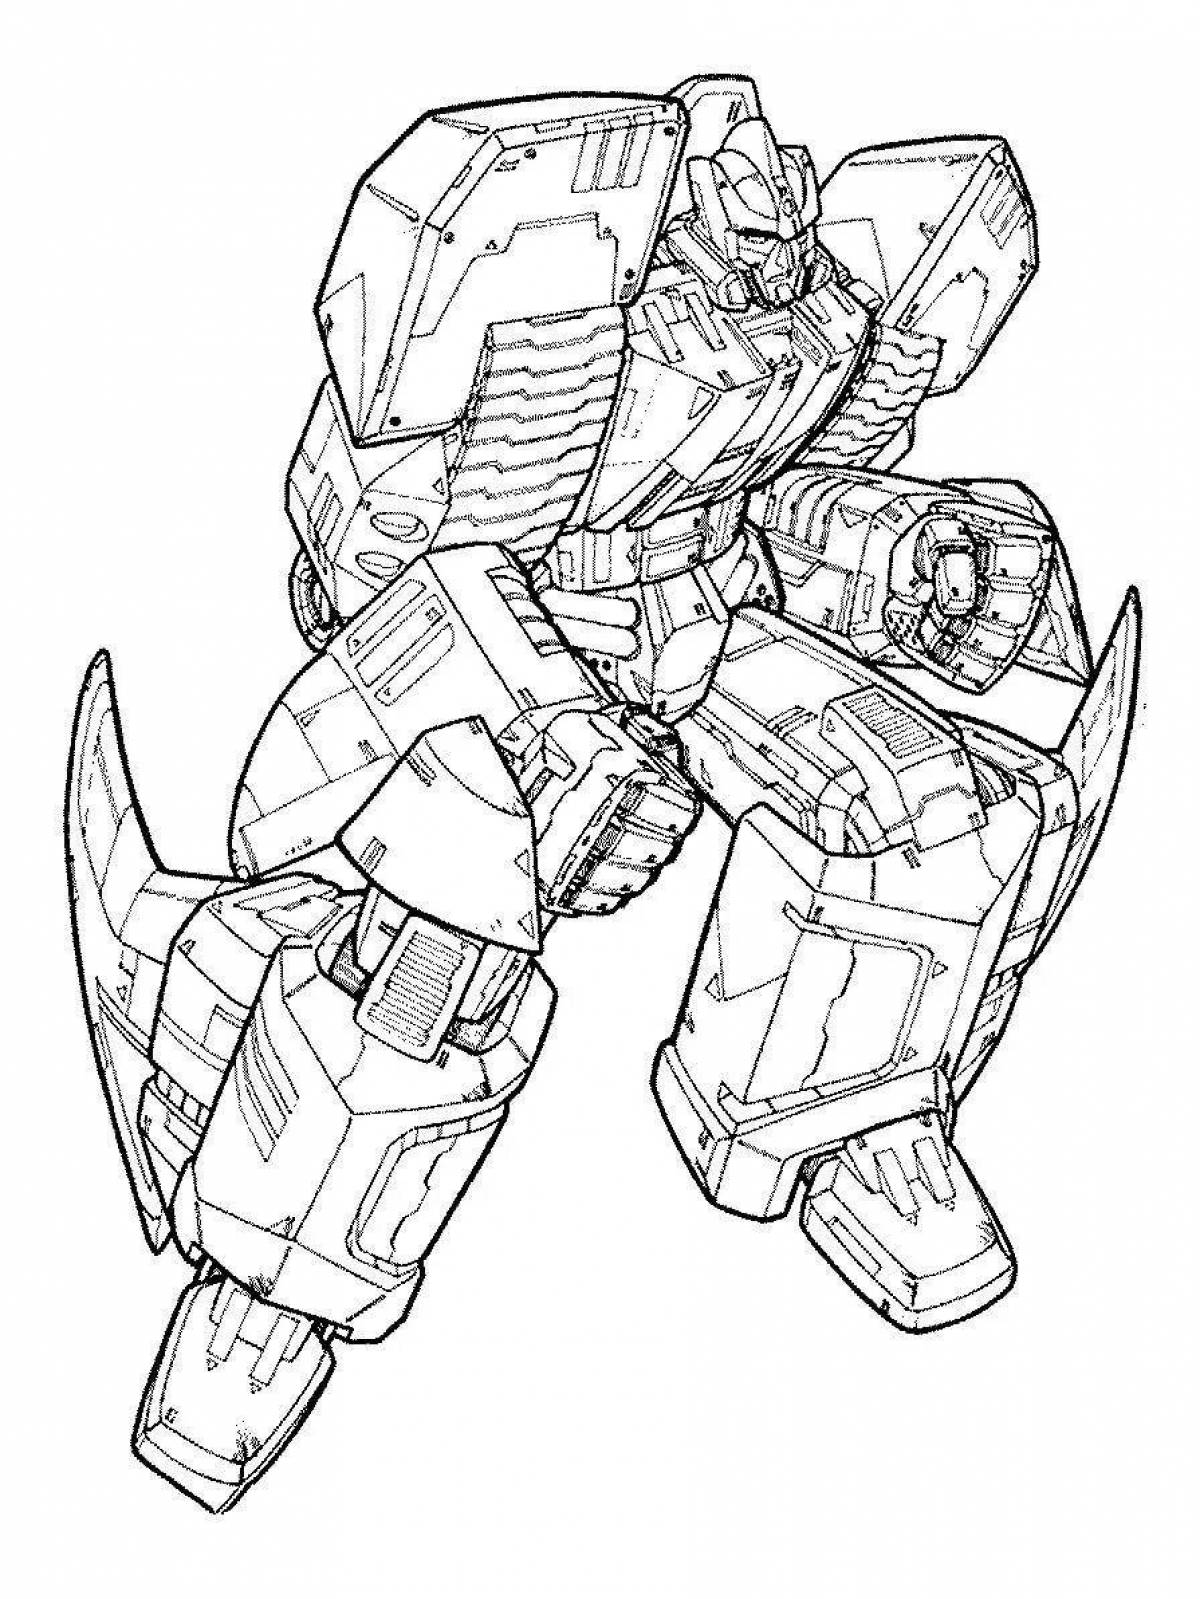 Adorable ironhide coloring page